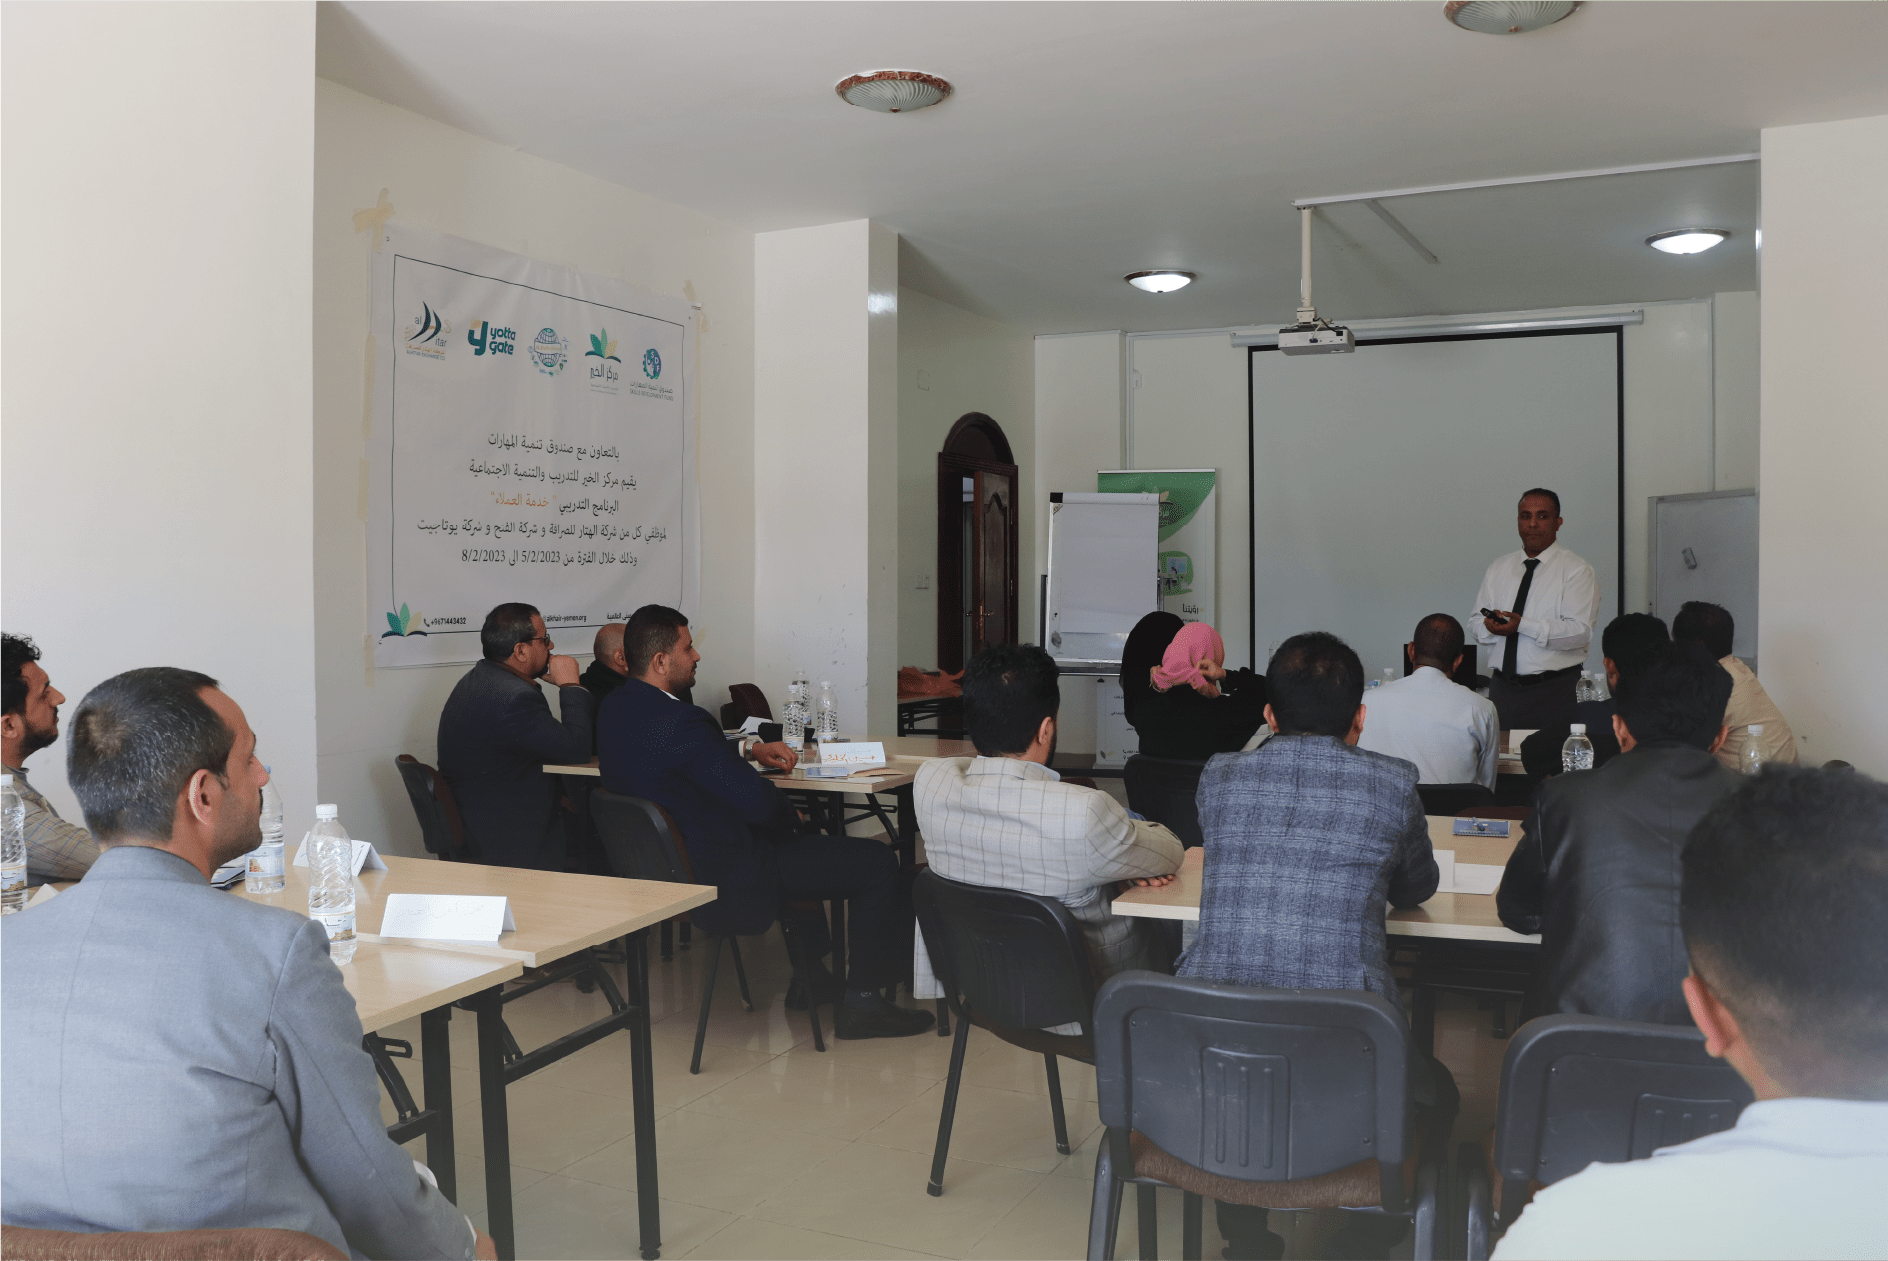 Al-Khair Center implemented a customer service program for a number of companies